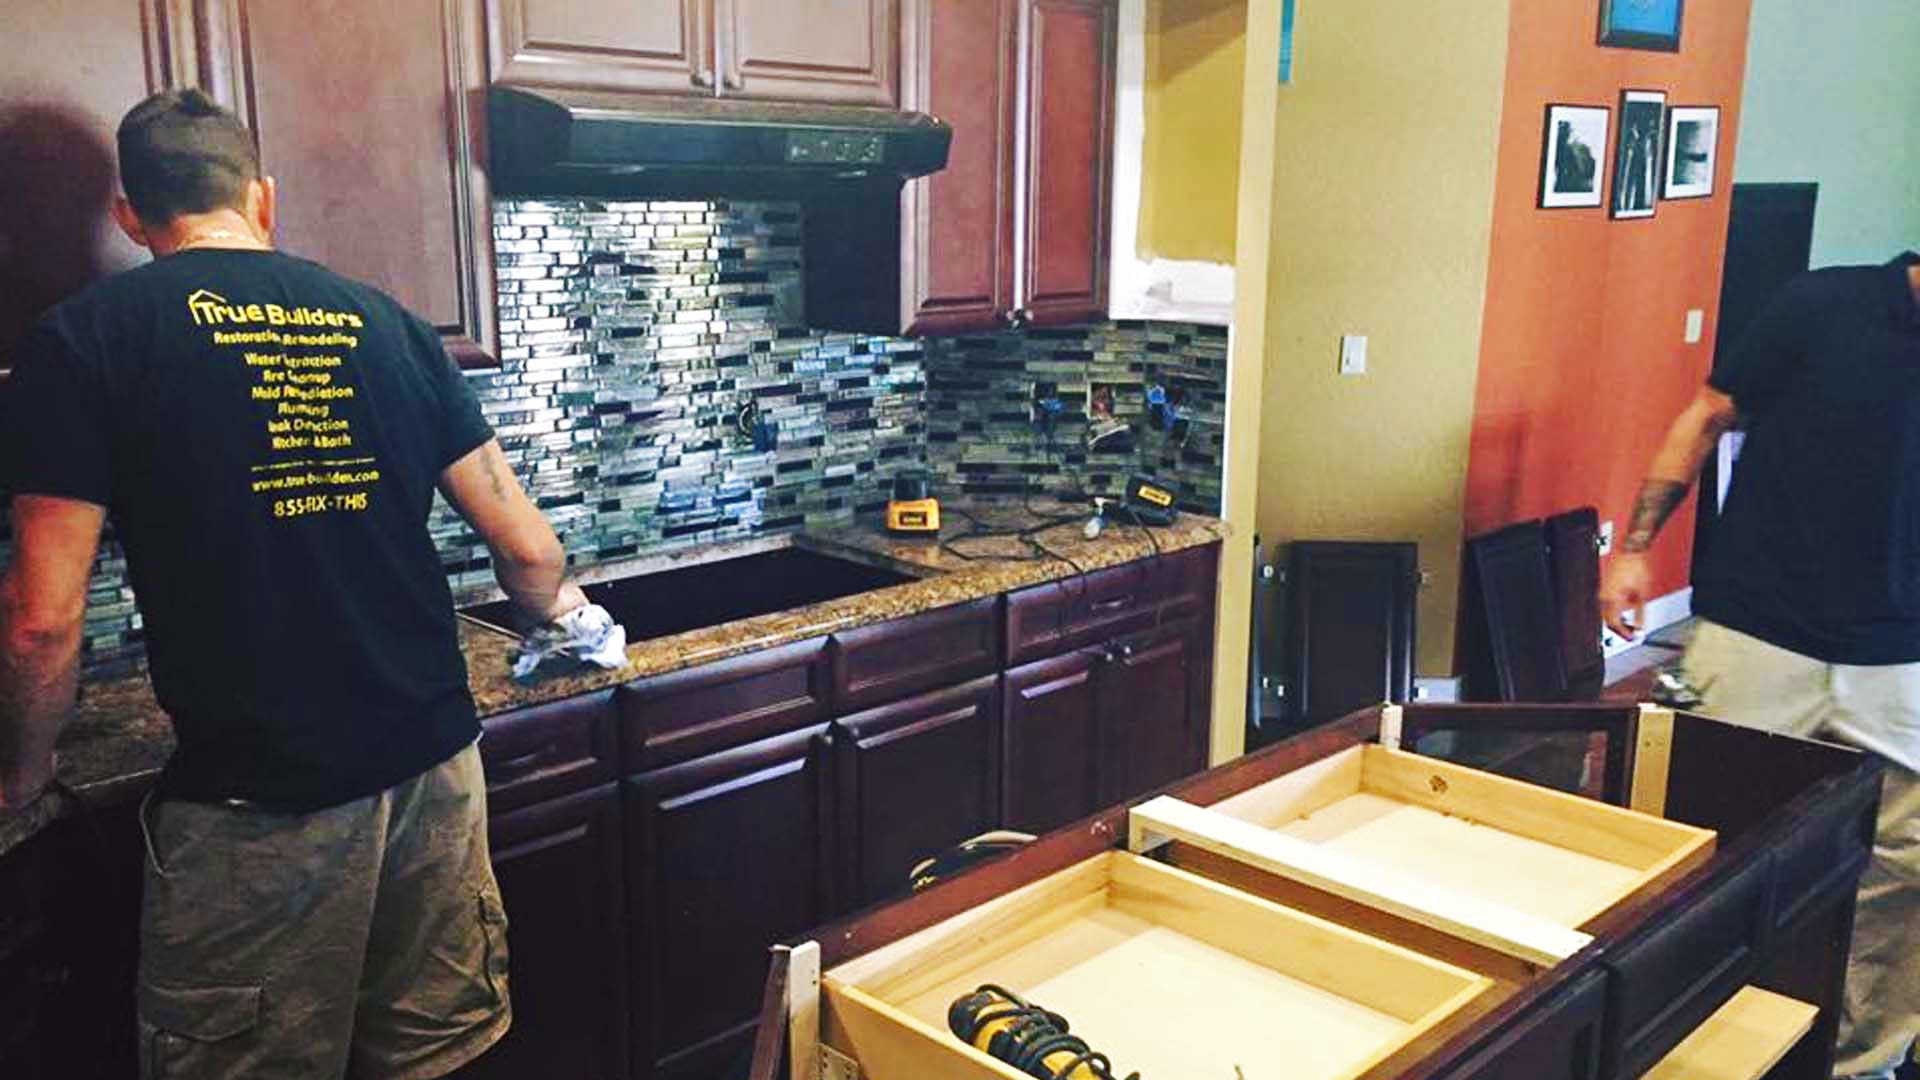 A homeowner in Zephyrhills, FL getting their kitchen remodeled by True Builders.